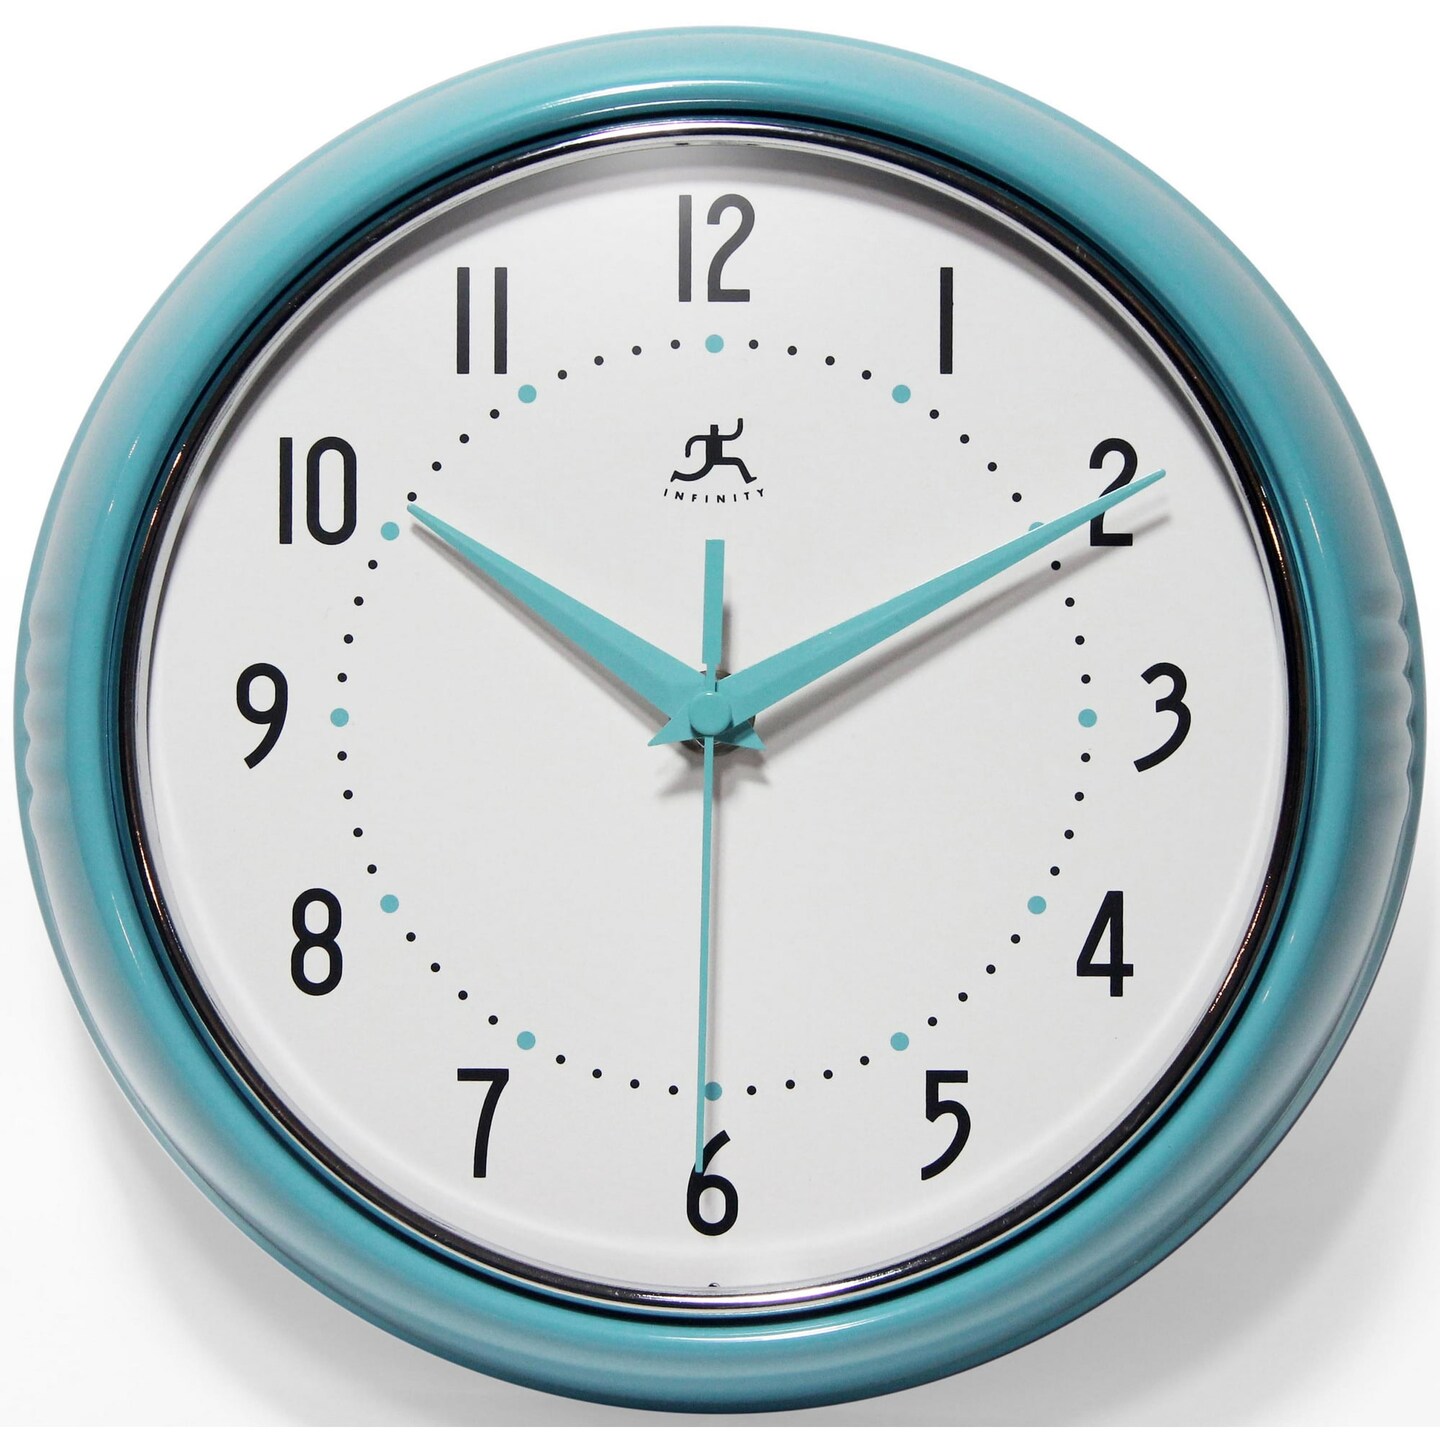 Infinity Instruments Retro Round Turquoise Metal 9.5-inch Analog Wall Clock